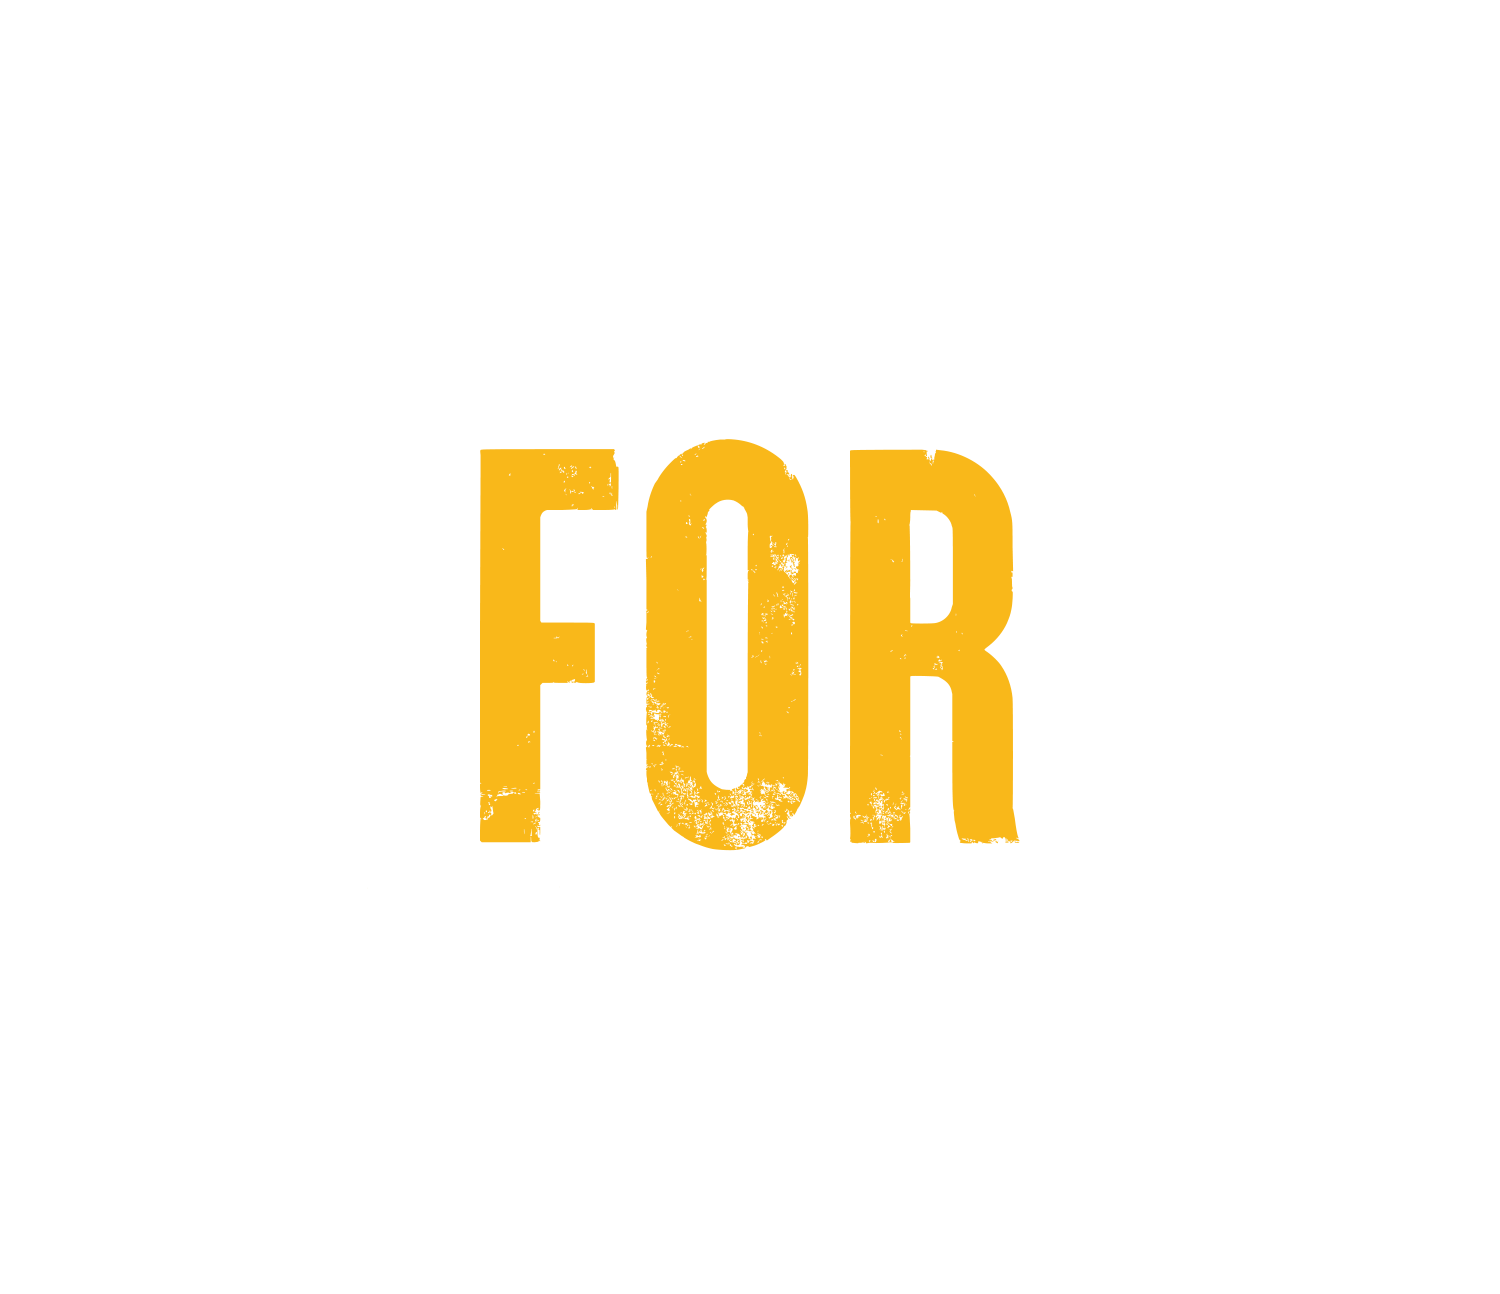 Fighting for facilities